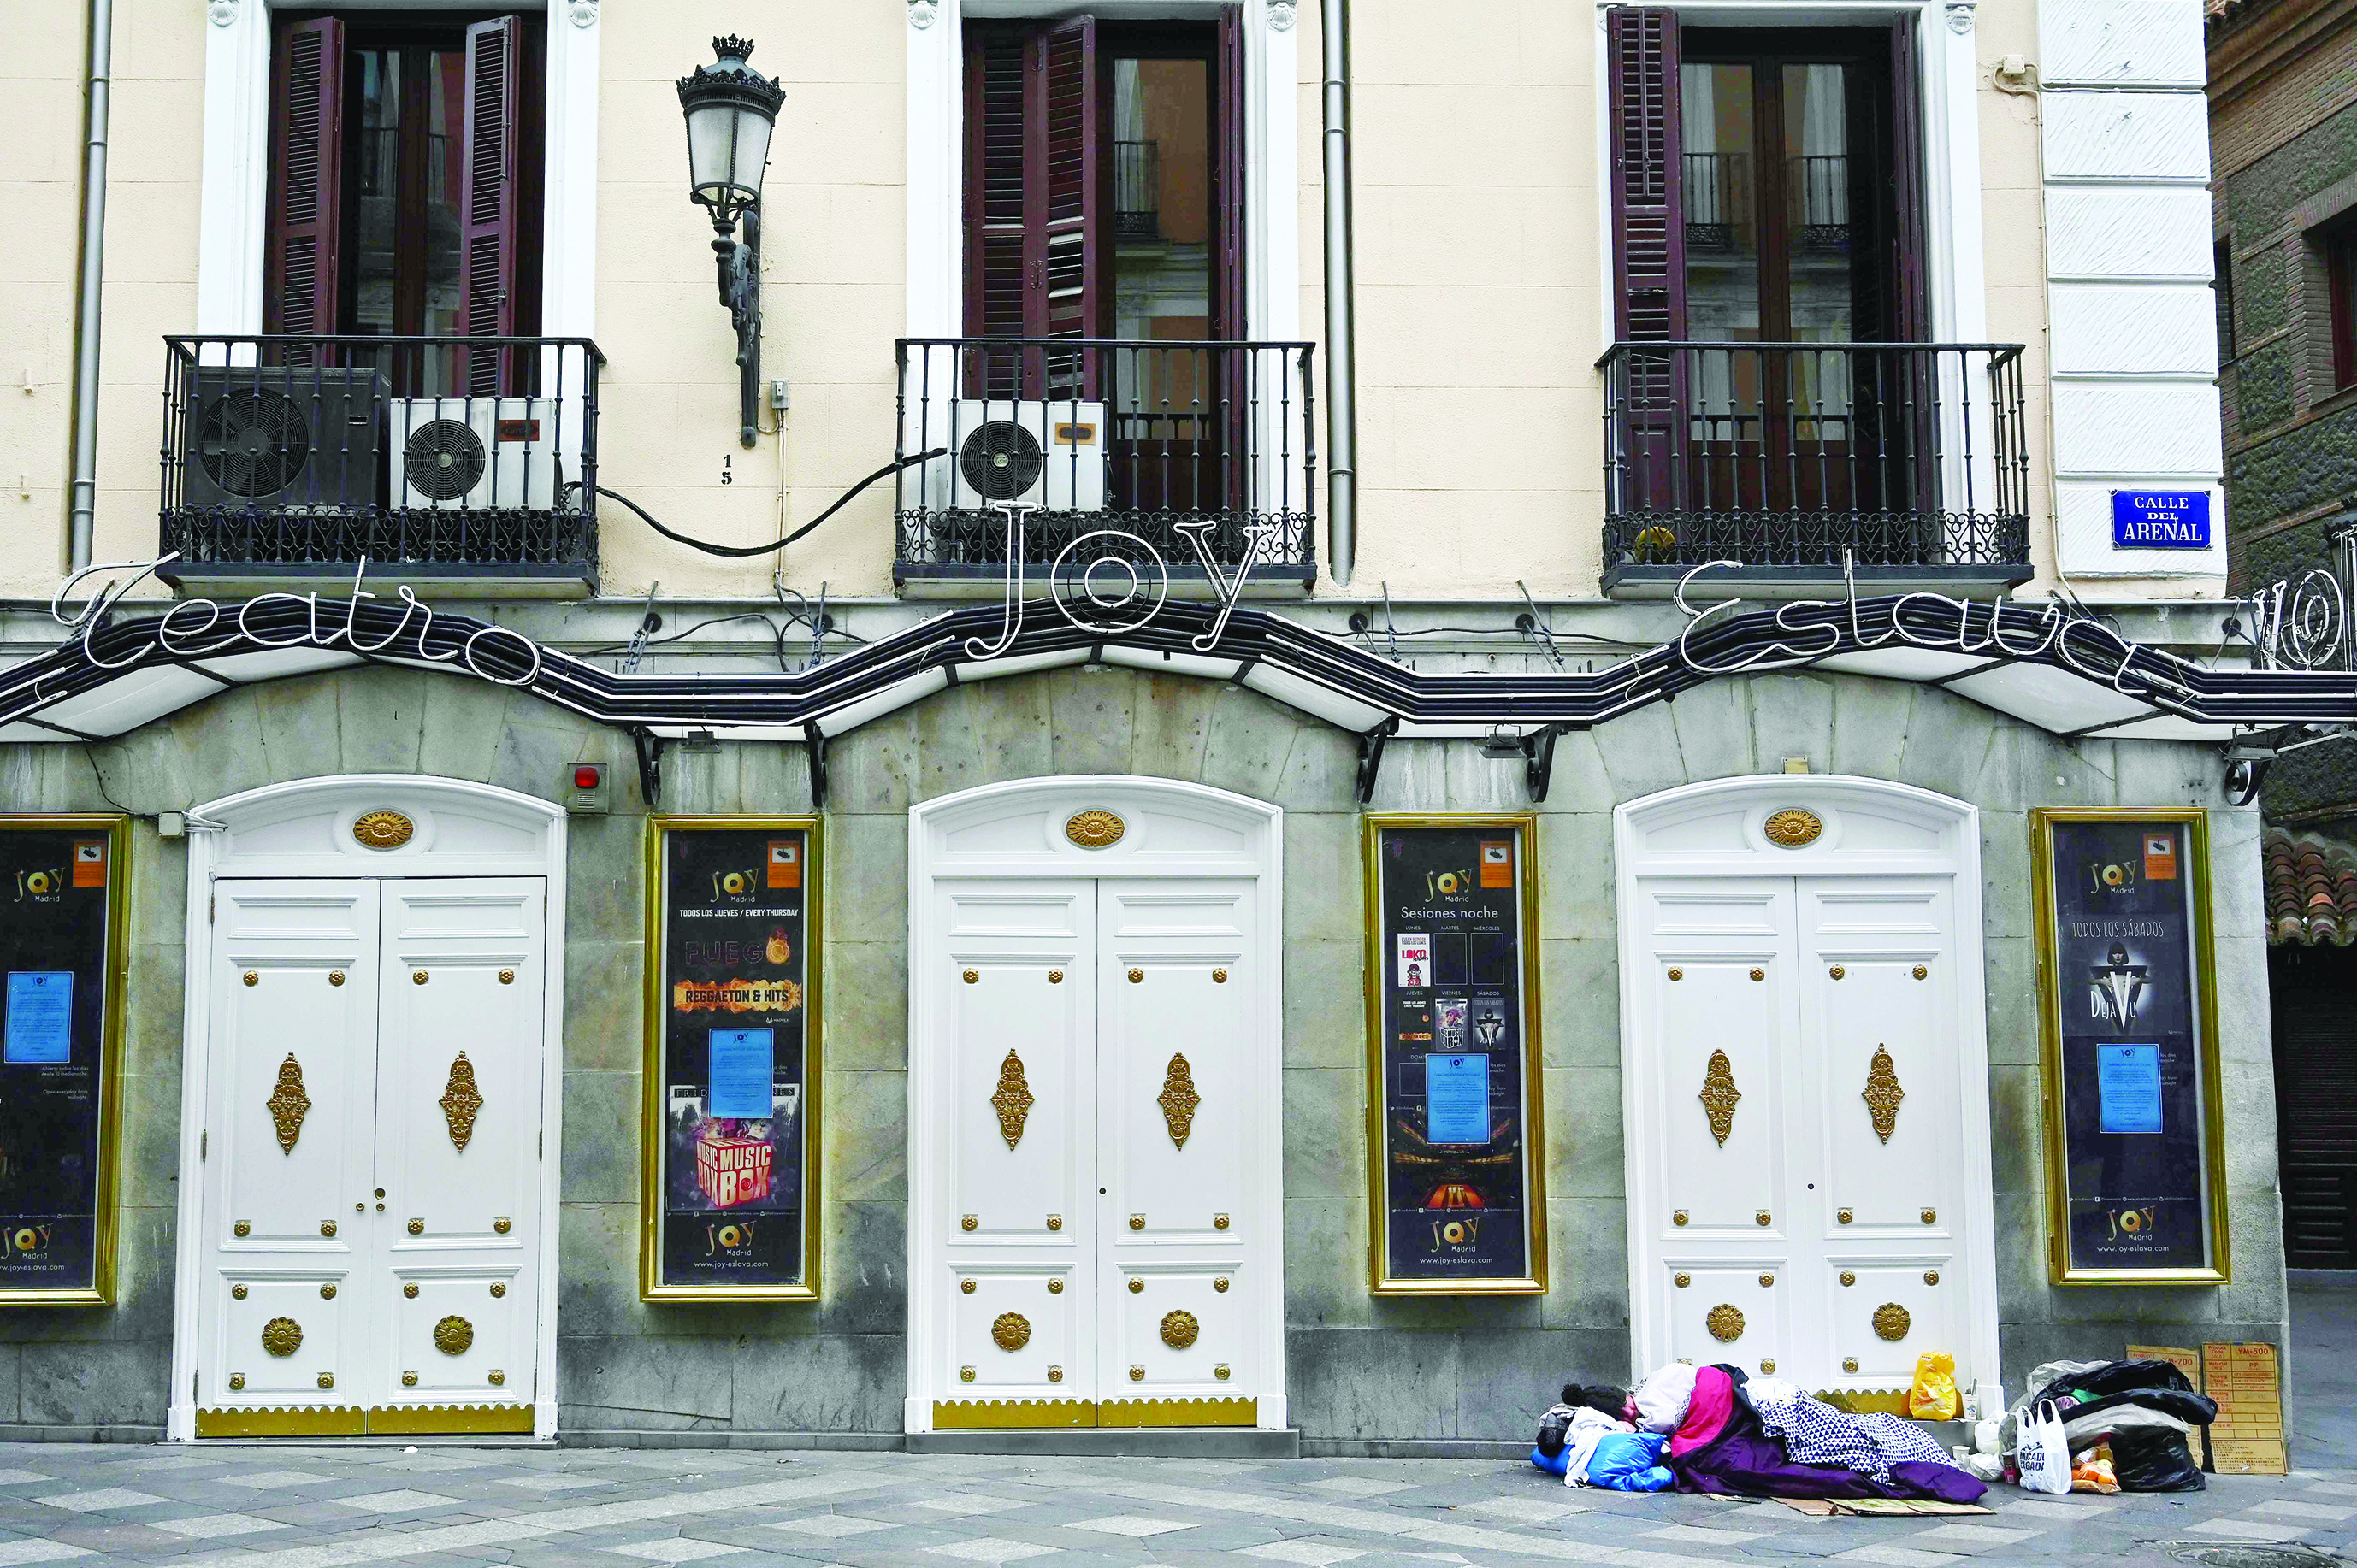 A homeless man sleeps in a deserted street in Madrid on March 27, 2020 amid a national lockdown to fight the spread of the COVID-19 coronavirus. - The death toll in Spain soared over 4,800 after 769 people died in 24 hours, in what was a record one-day figure for fatalities in the country. (Photo by Gabriel BOUYS / AFP)